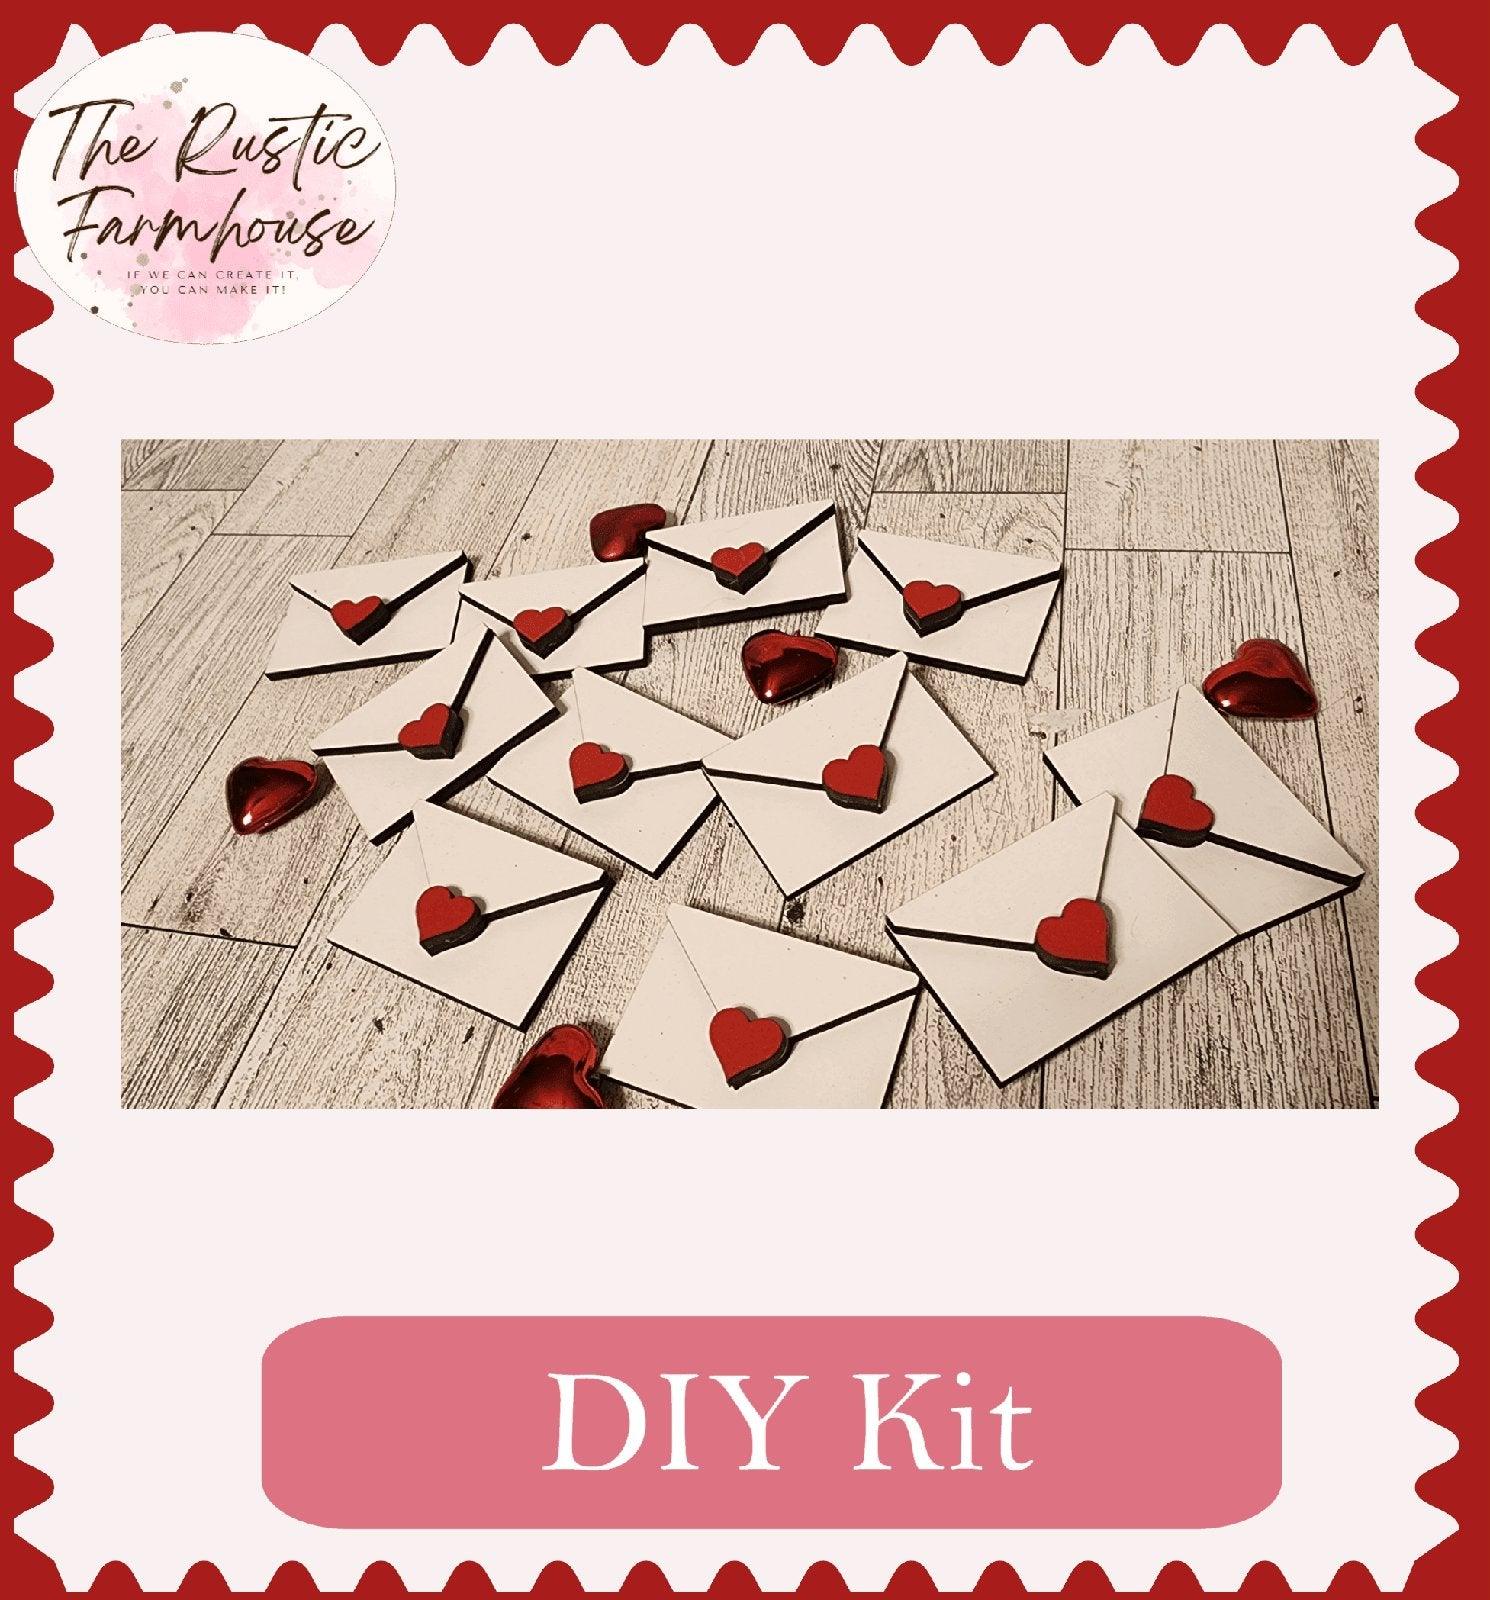 Valentine Love Letters Scatter Tiered Tray Set - DIY - RusticFarmhouseDecor